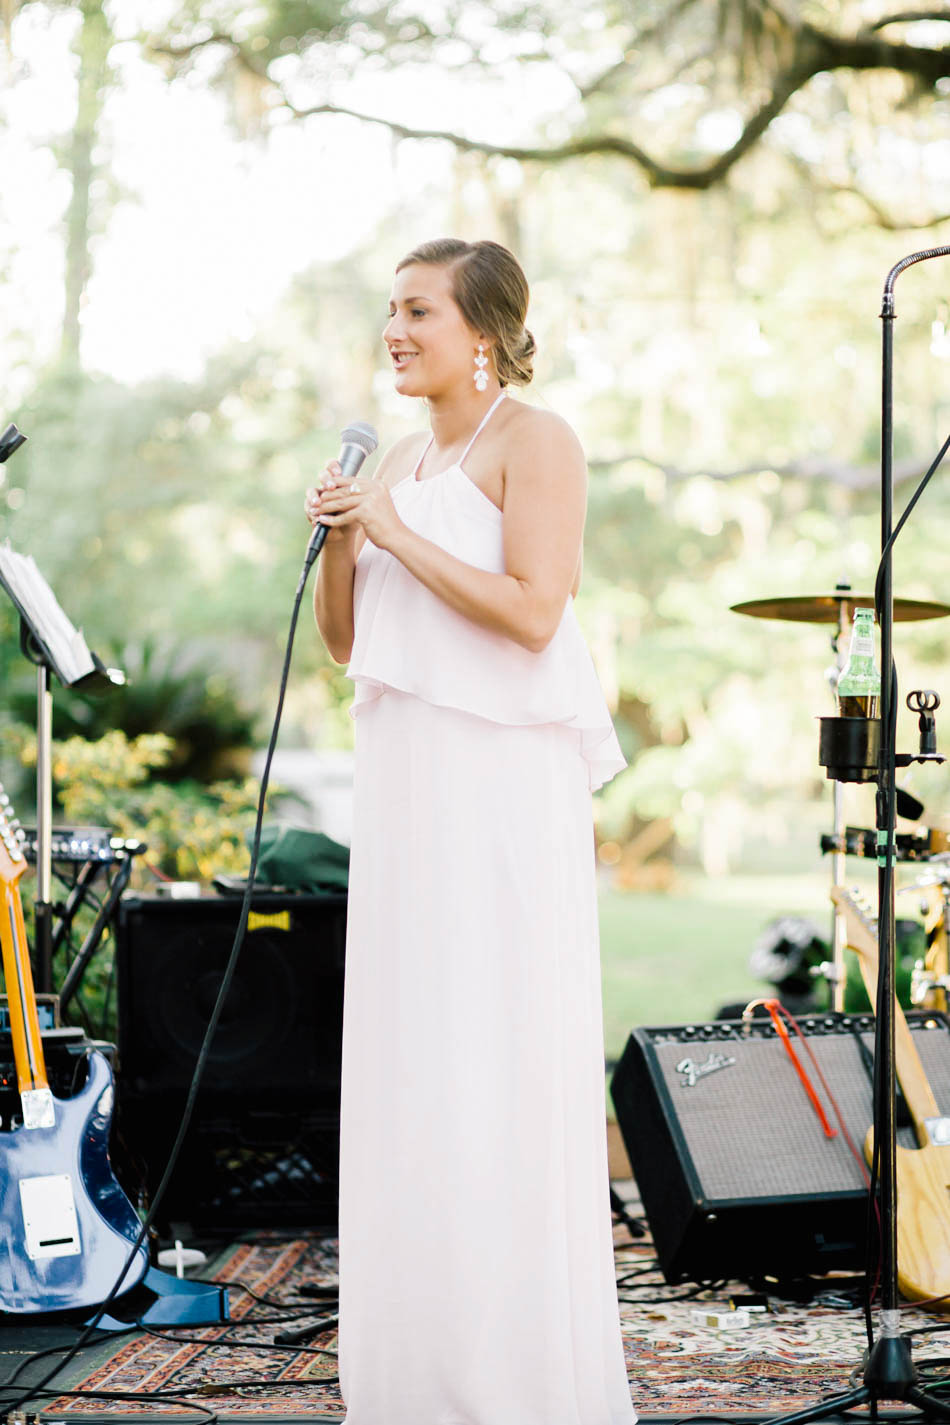 Speeches are given, Wadmalaw Island, South Carolina Kate Timbers Photography. http://katetimbers.com #katetimbersphotography // Charleston Photography // Inspiration